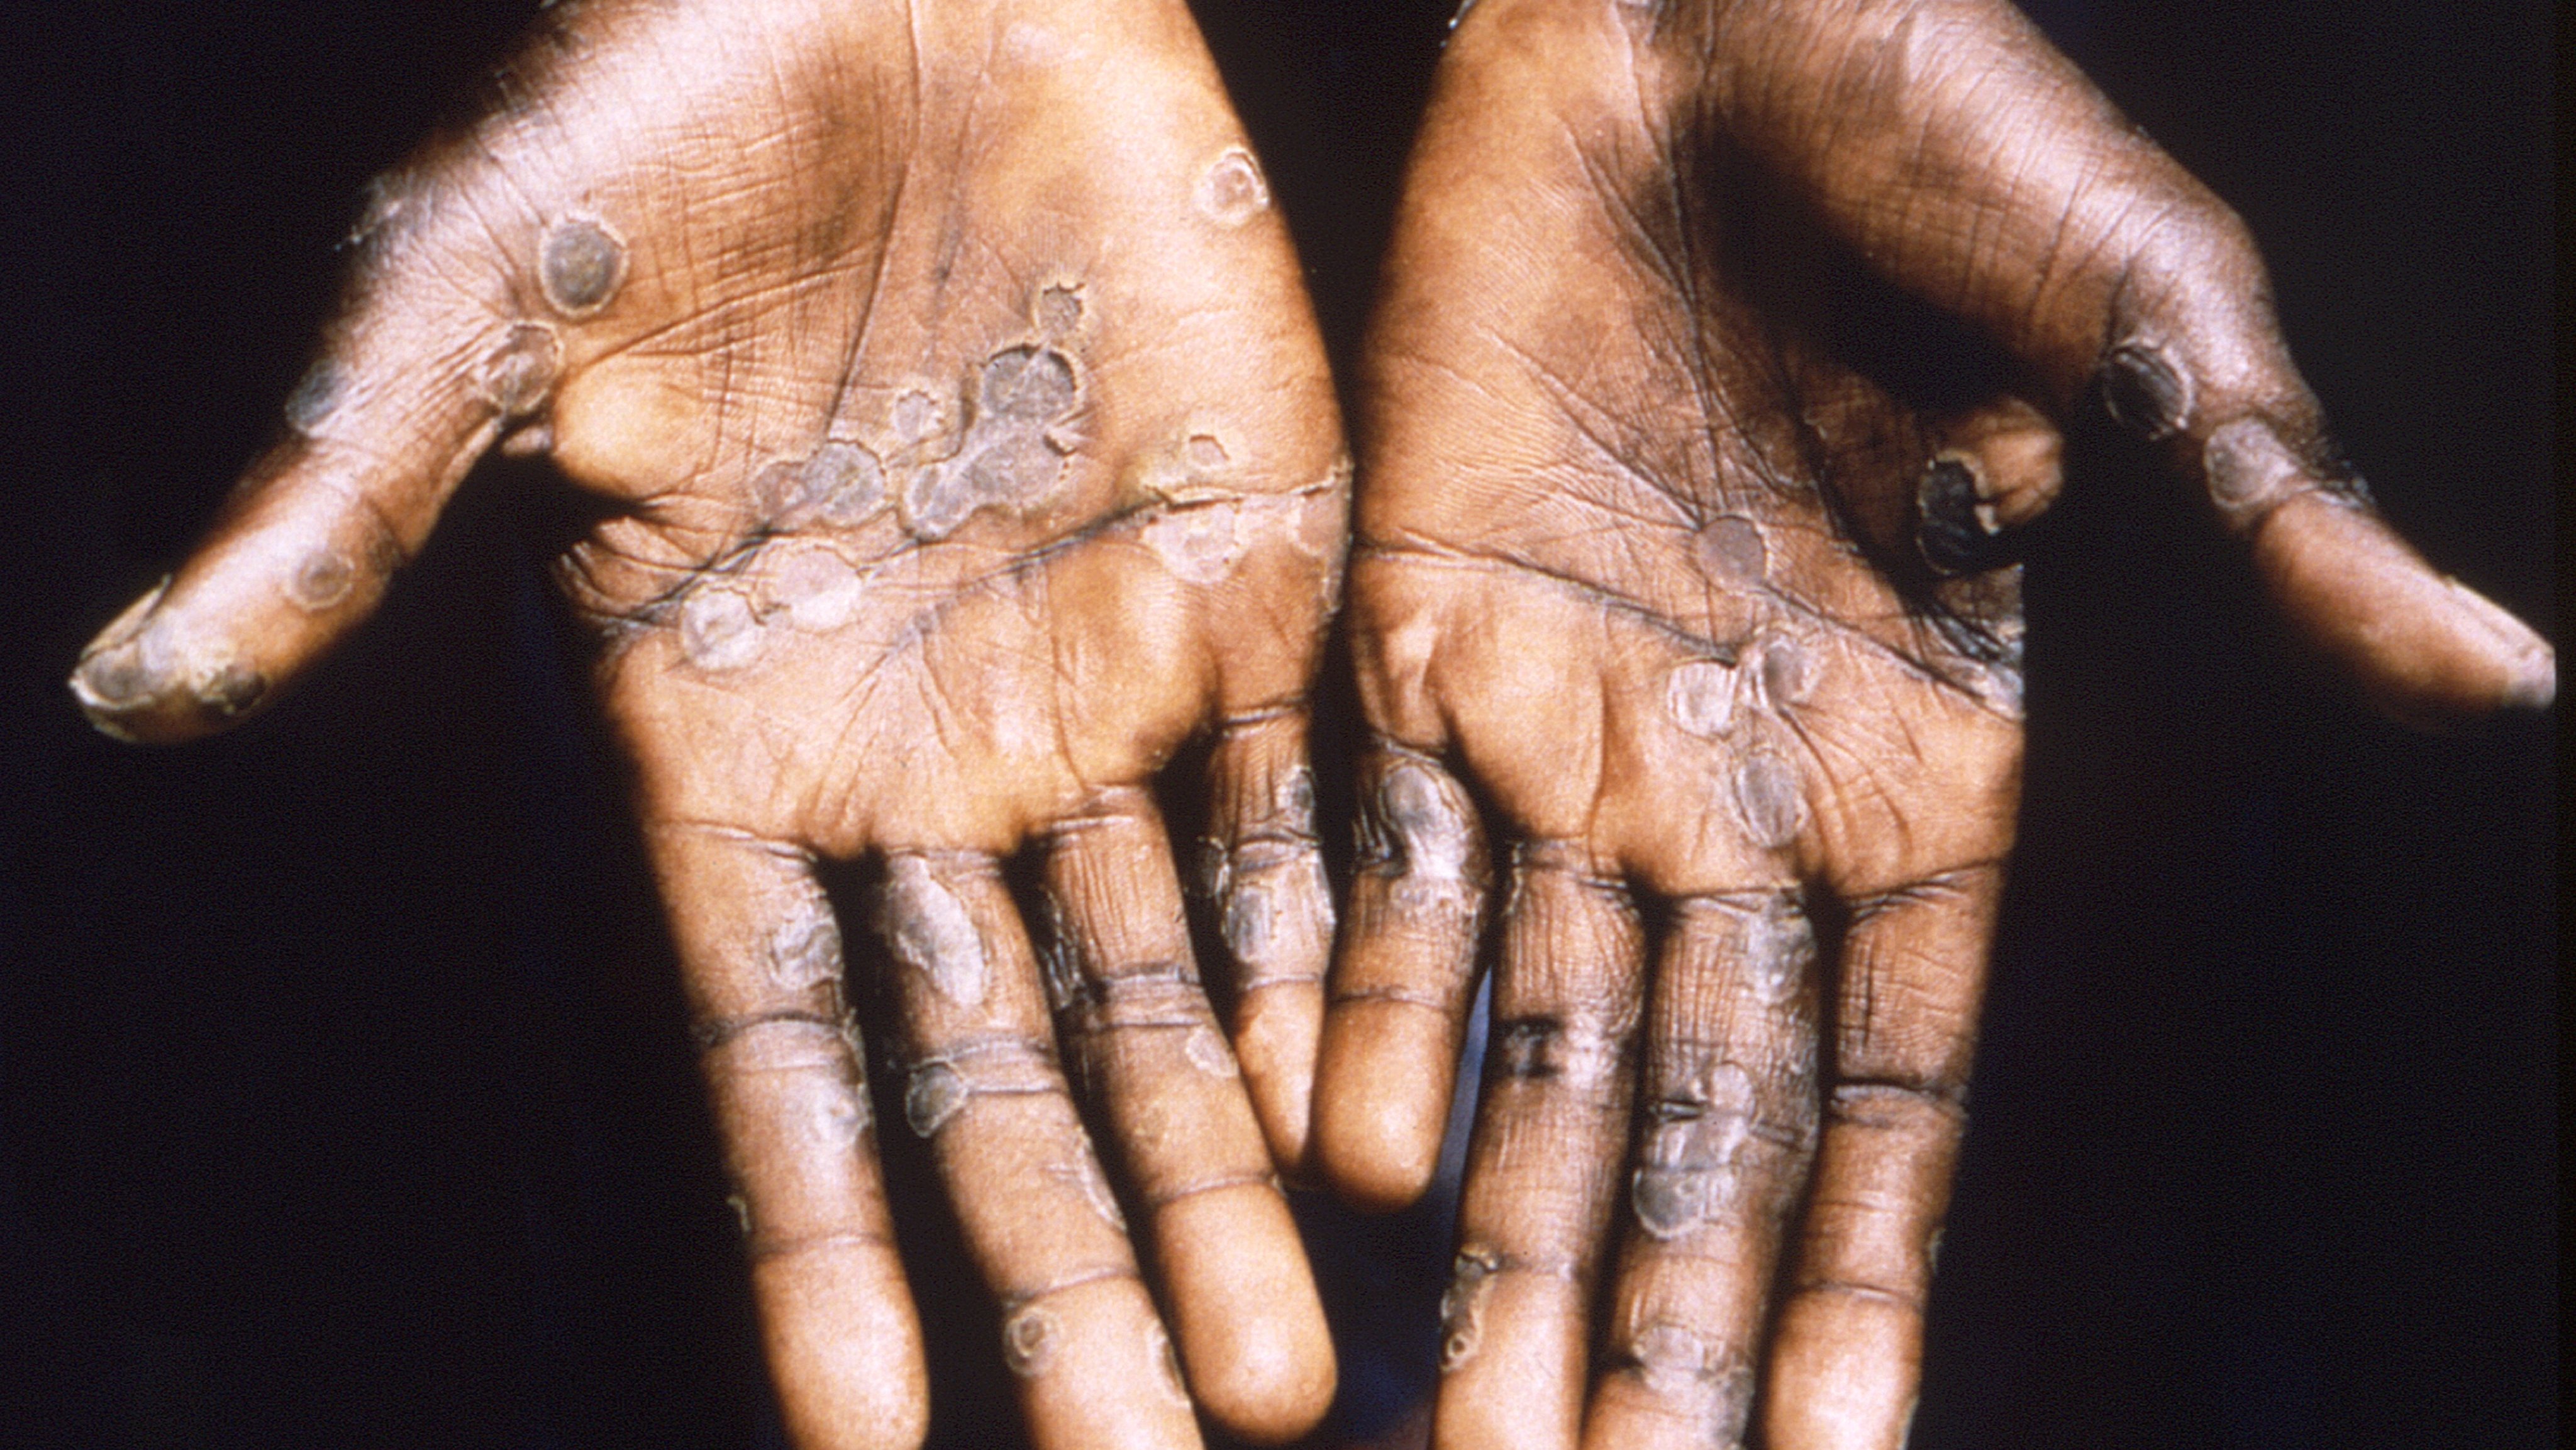 Monkeypox Lesions On Hands